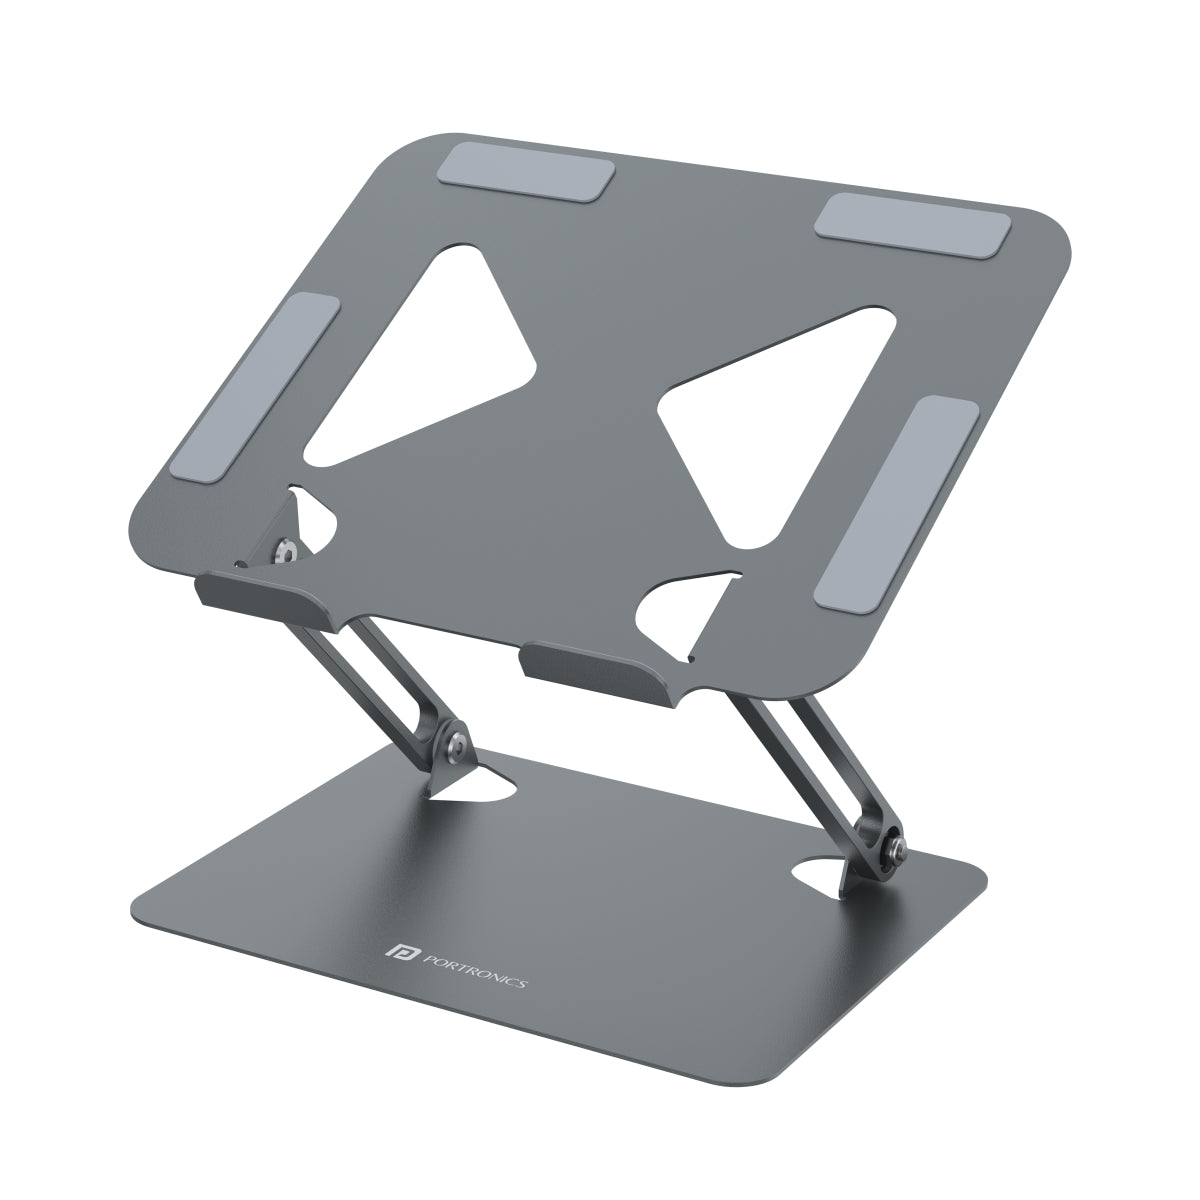  Buy Portronics My Buddy K7 Portable Laptop Stand with adjustable angles. grey